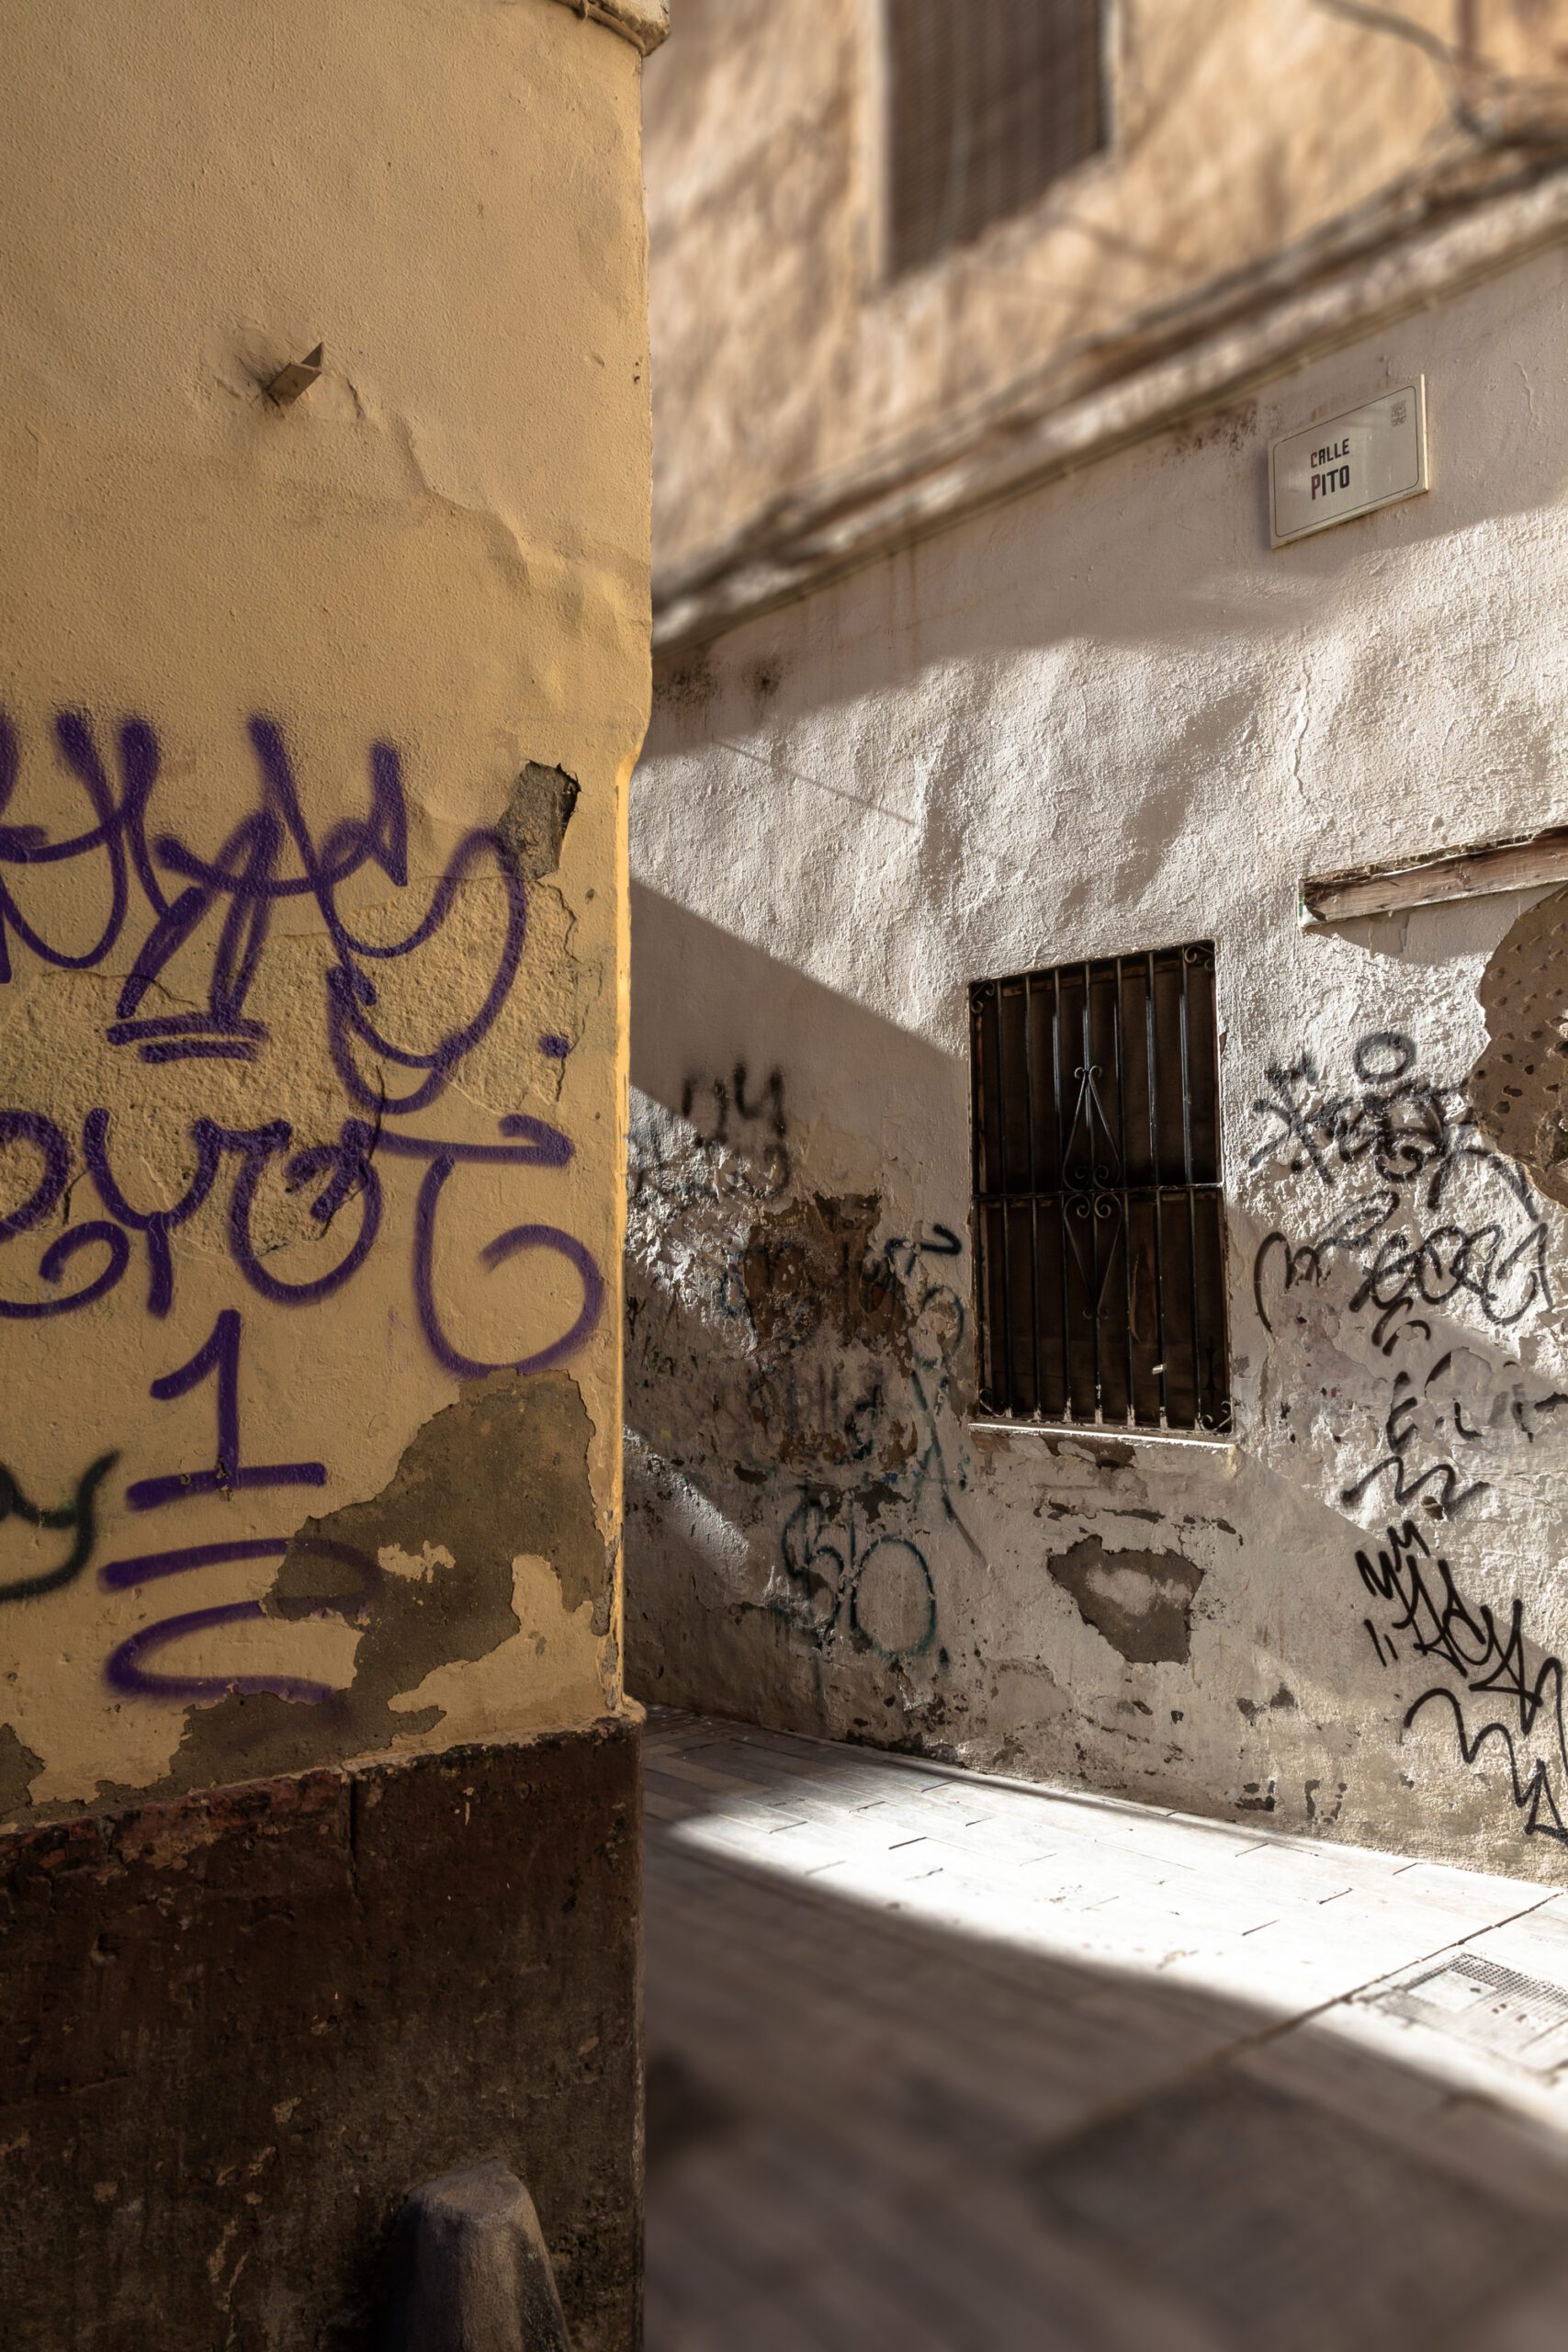 Graffiti-covered walls in a sunlit alleyway of Malaga